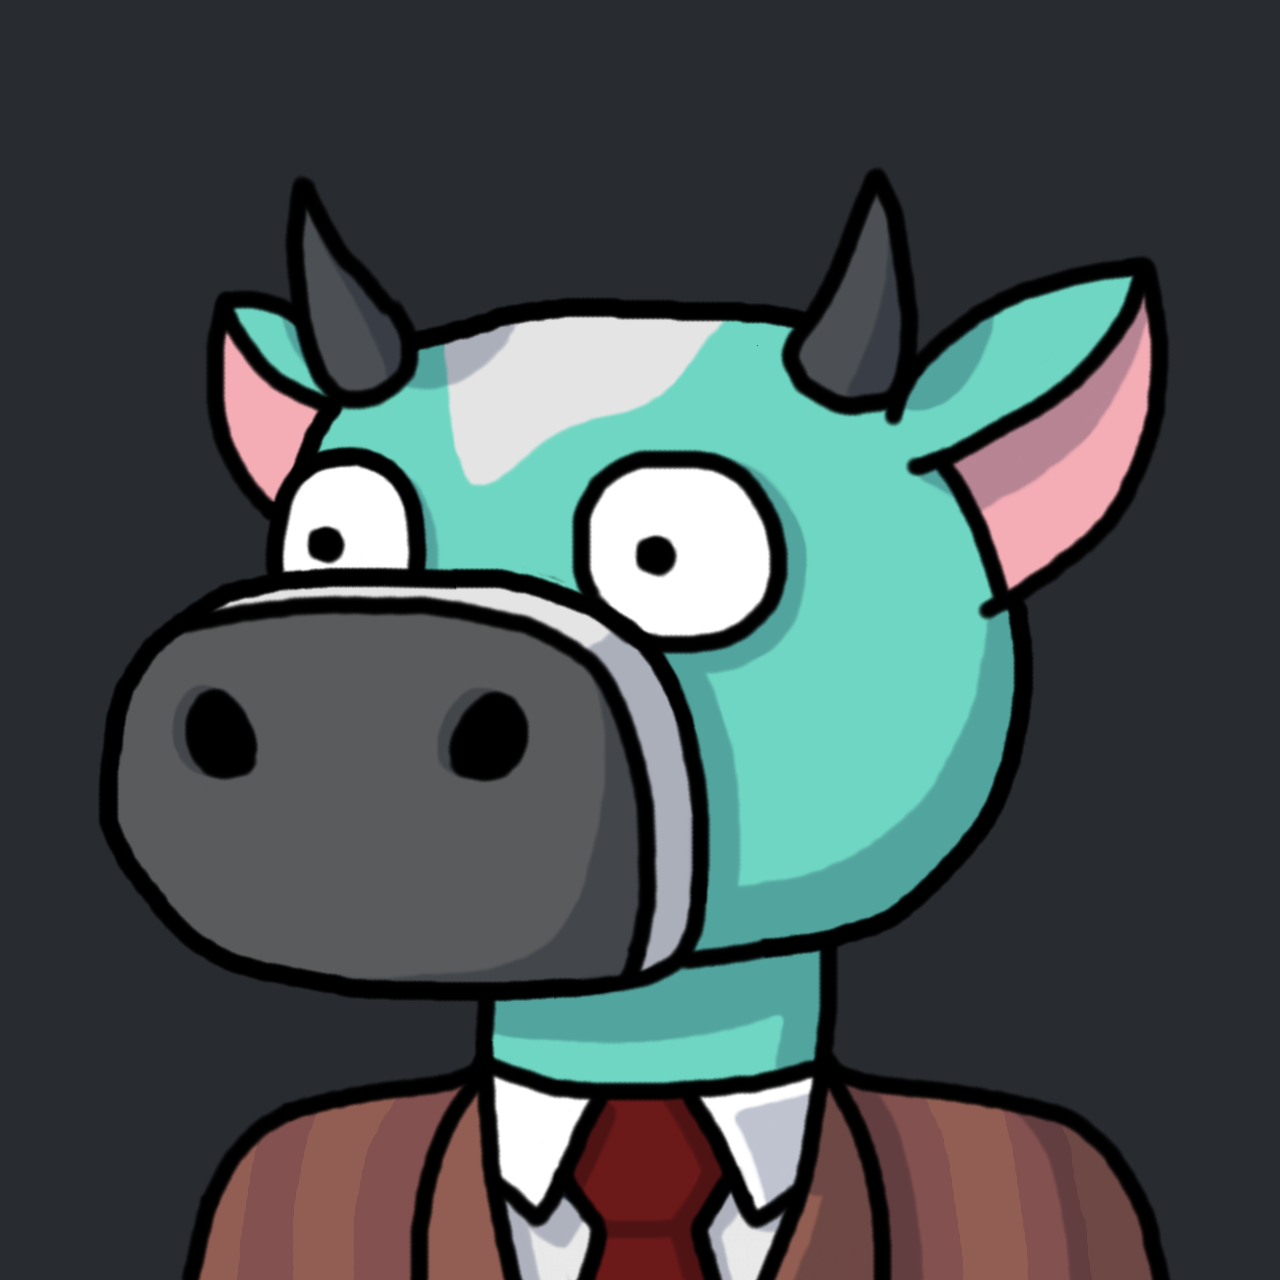 KeepItMinty's Profile Picture on PvPRP